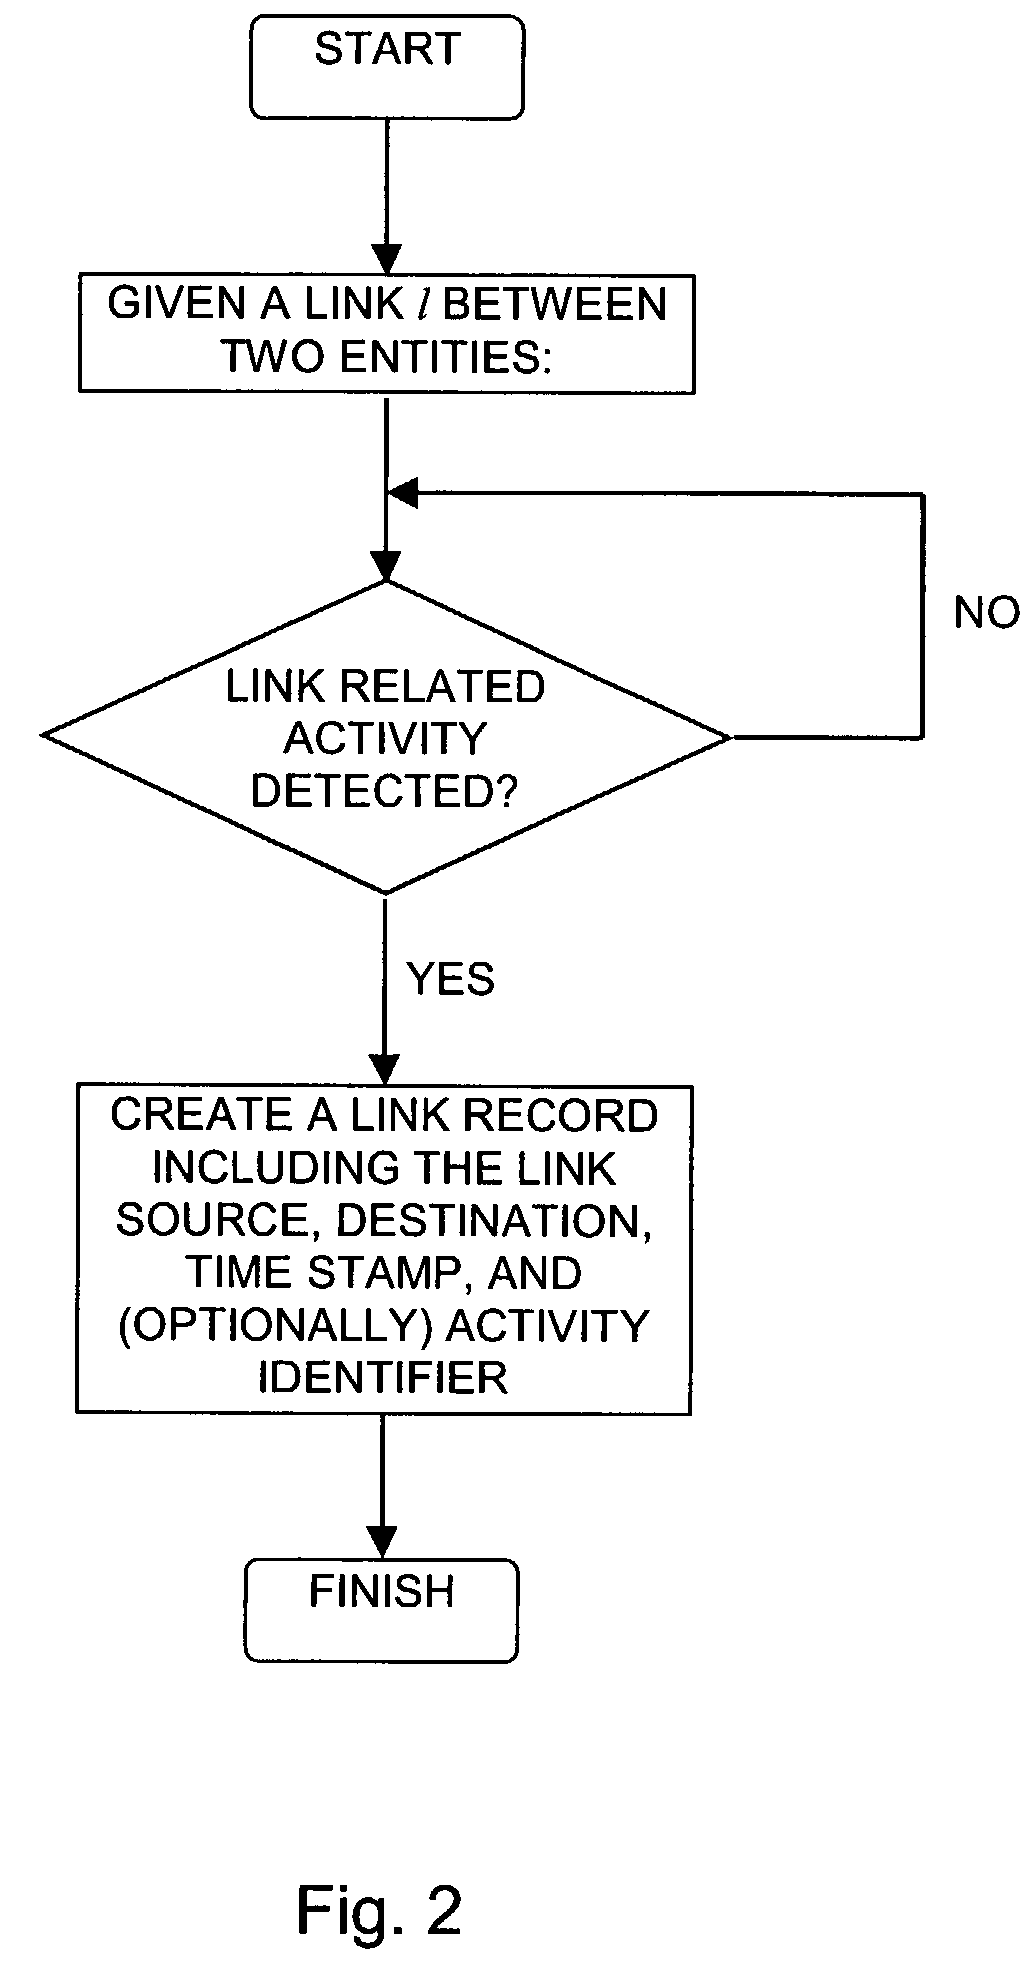 Temporal link analysis of linked entities